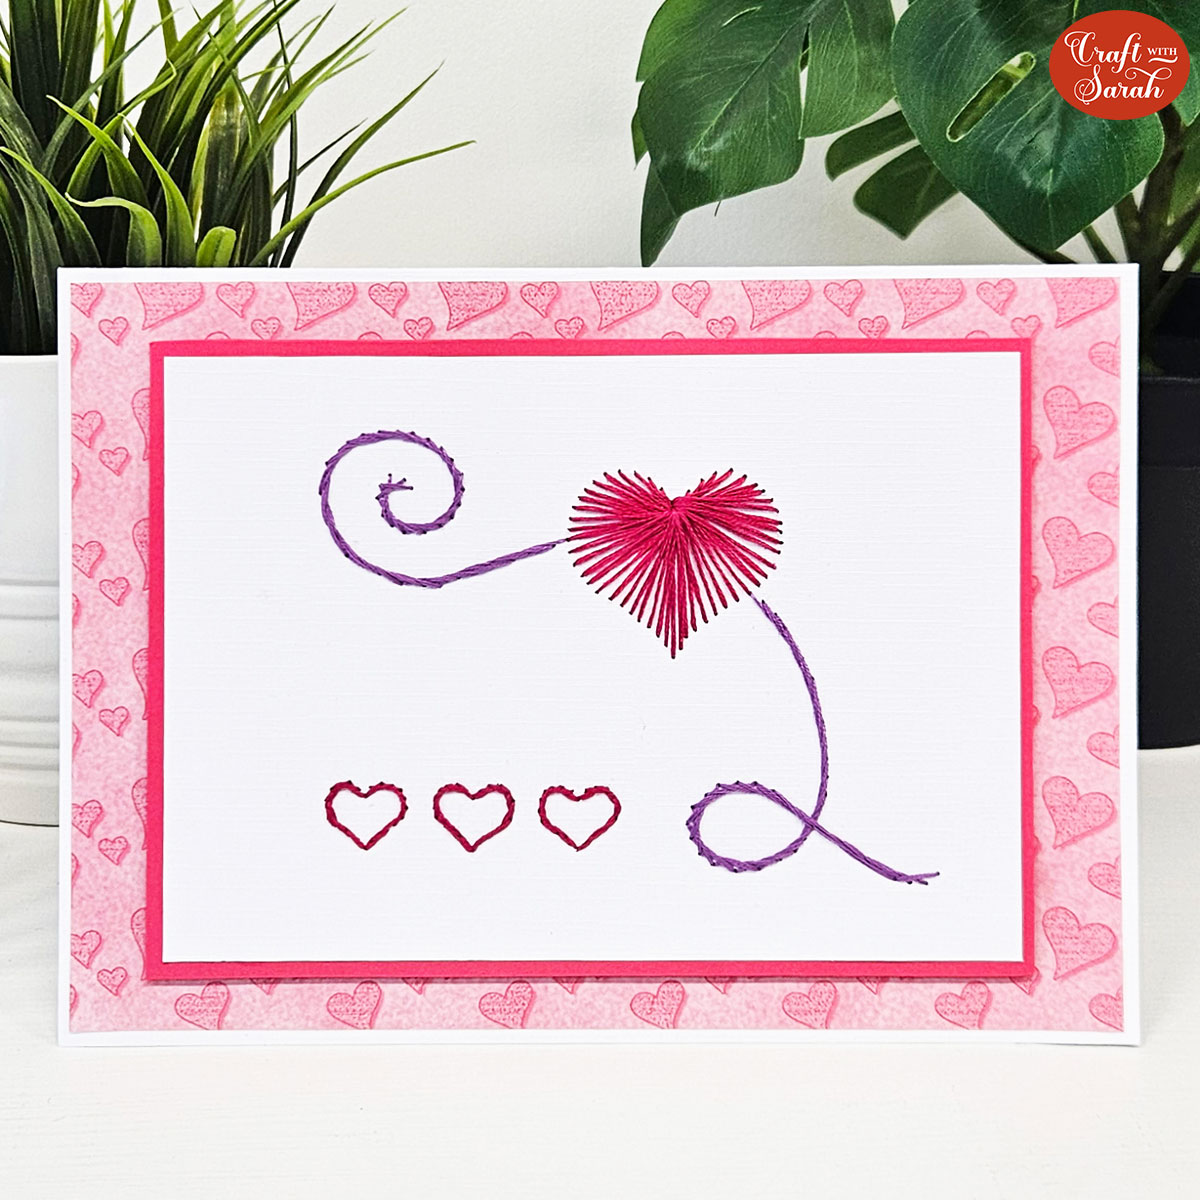 Card Stitching Patterns: Paper Embroidery on Cards! - Craft with Sarah